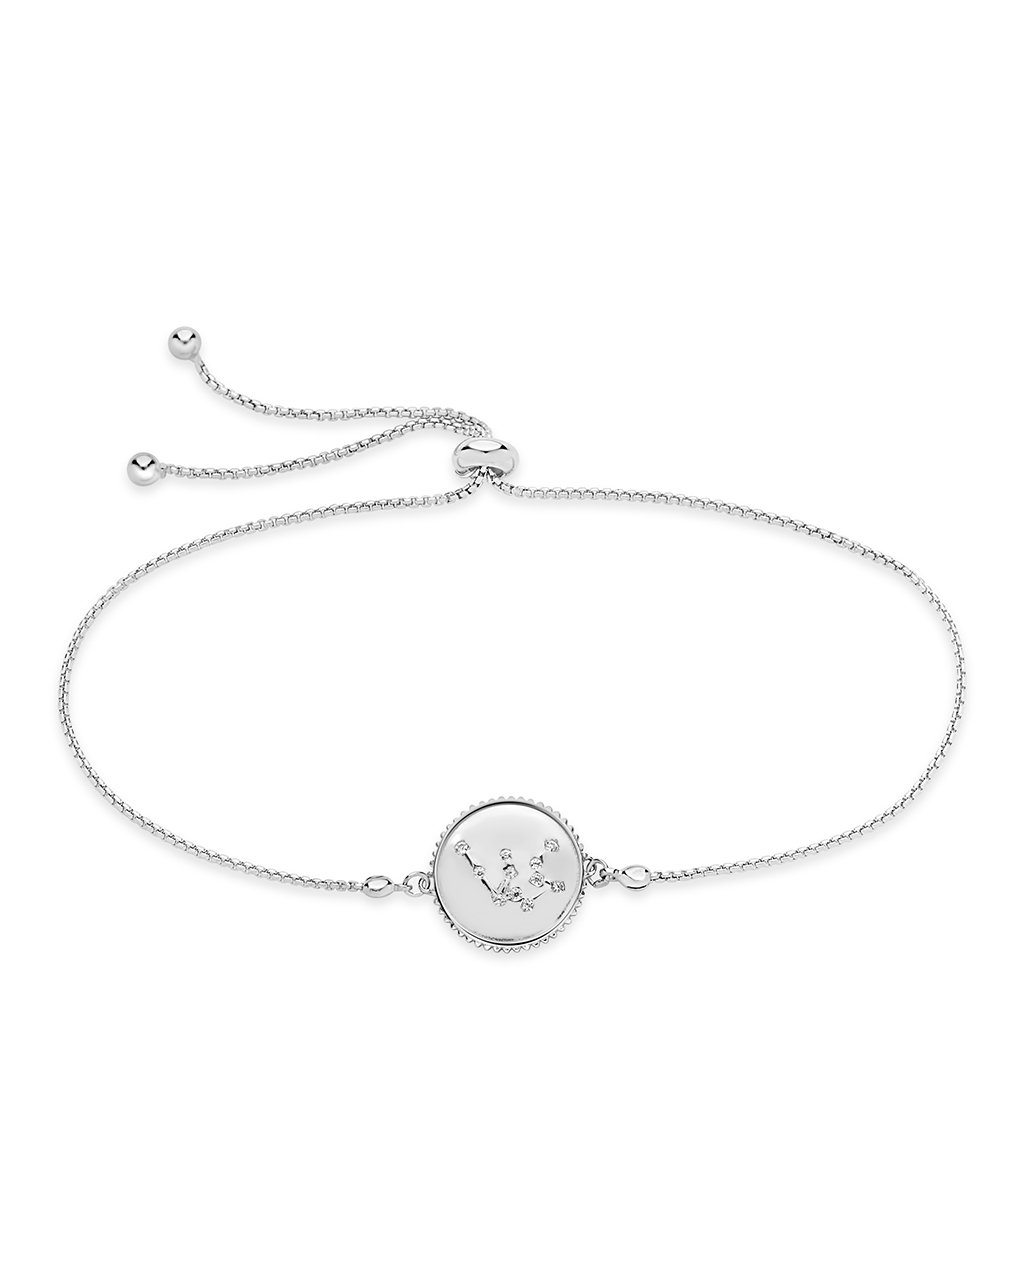 Sterling Silver Constellation Disk Bolo Bracelet Bracelet Sterling Forever Silver Aquarius (Jan 20 - Feb 18) 